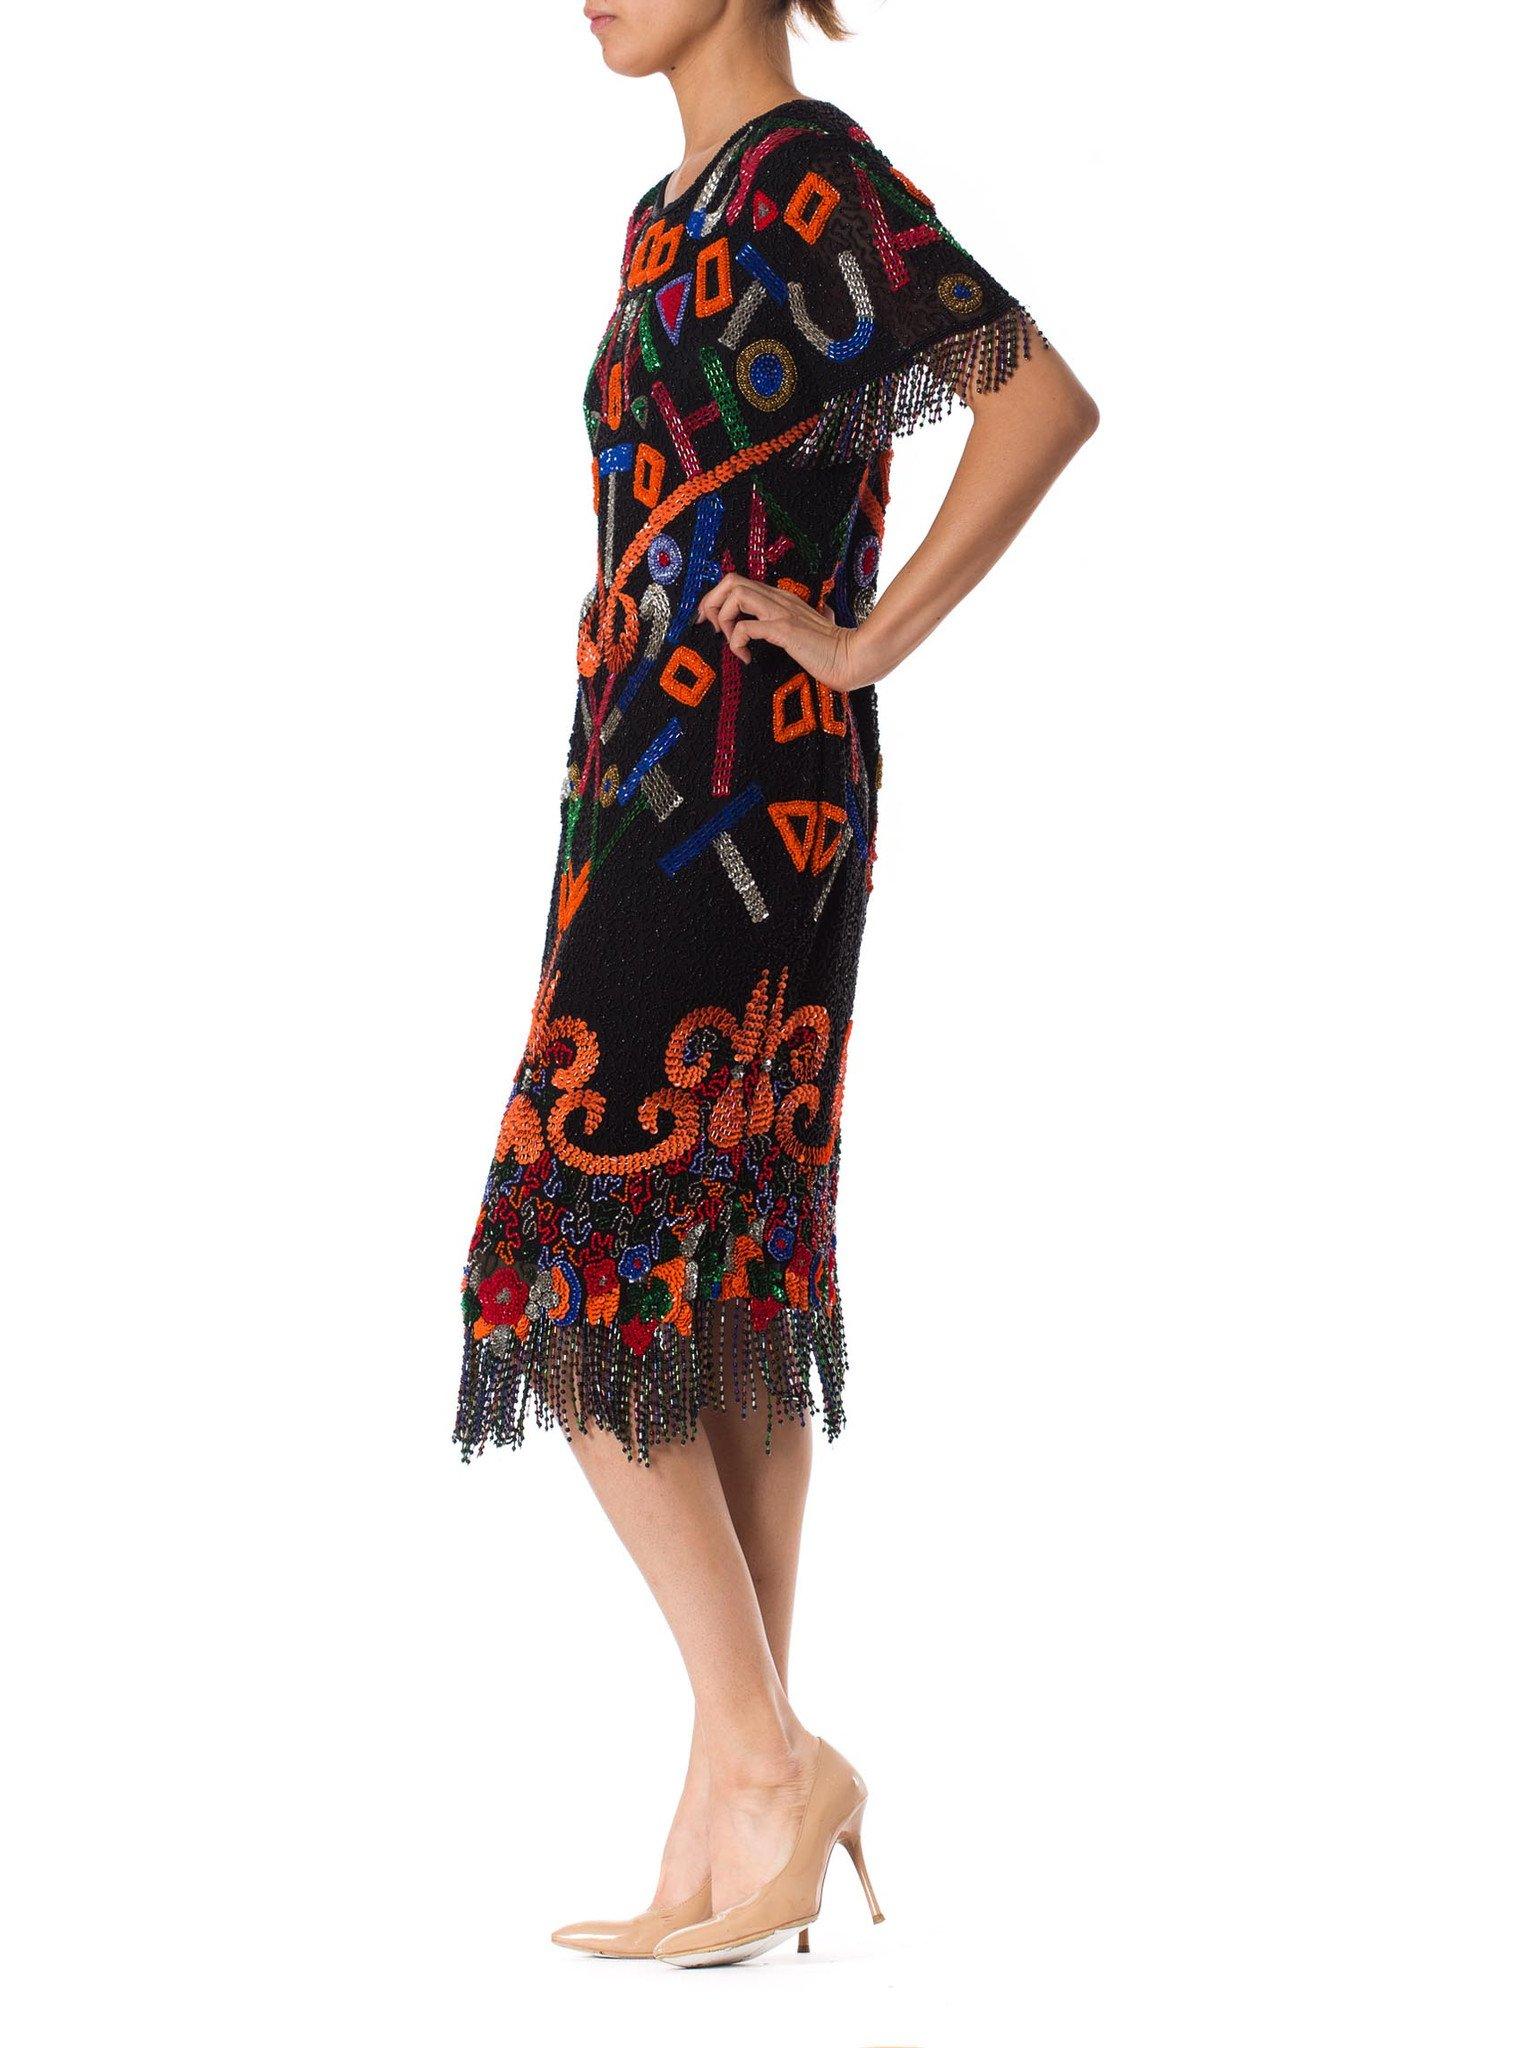 1980S  Black Beaded Silk Chiffon Tribal Inspired Cocktail Dress With Fringe Hem & Cut Out Back